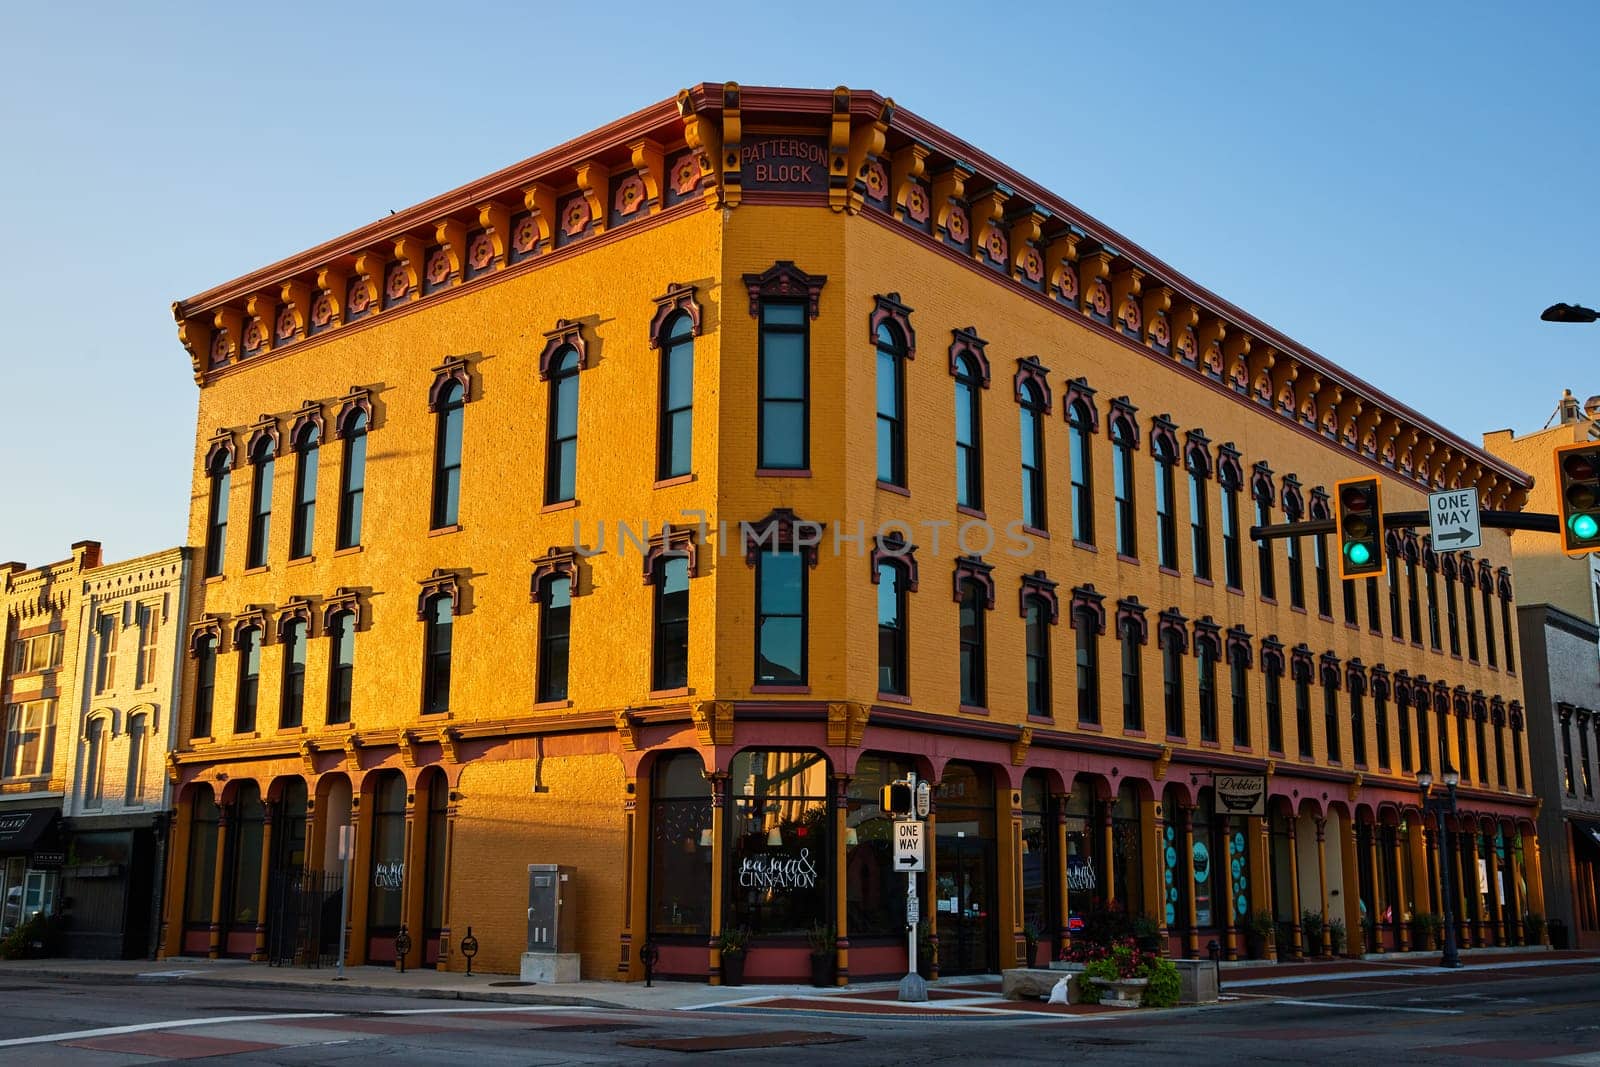 Golden hour illuminates the historic Patterson Block in downtown Muncie, Indiana, highlighting its rich architectural details and commercial charm